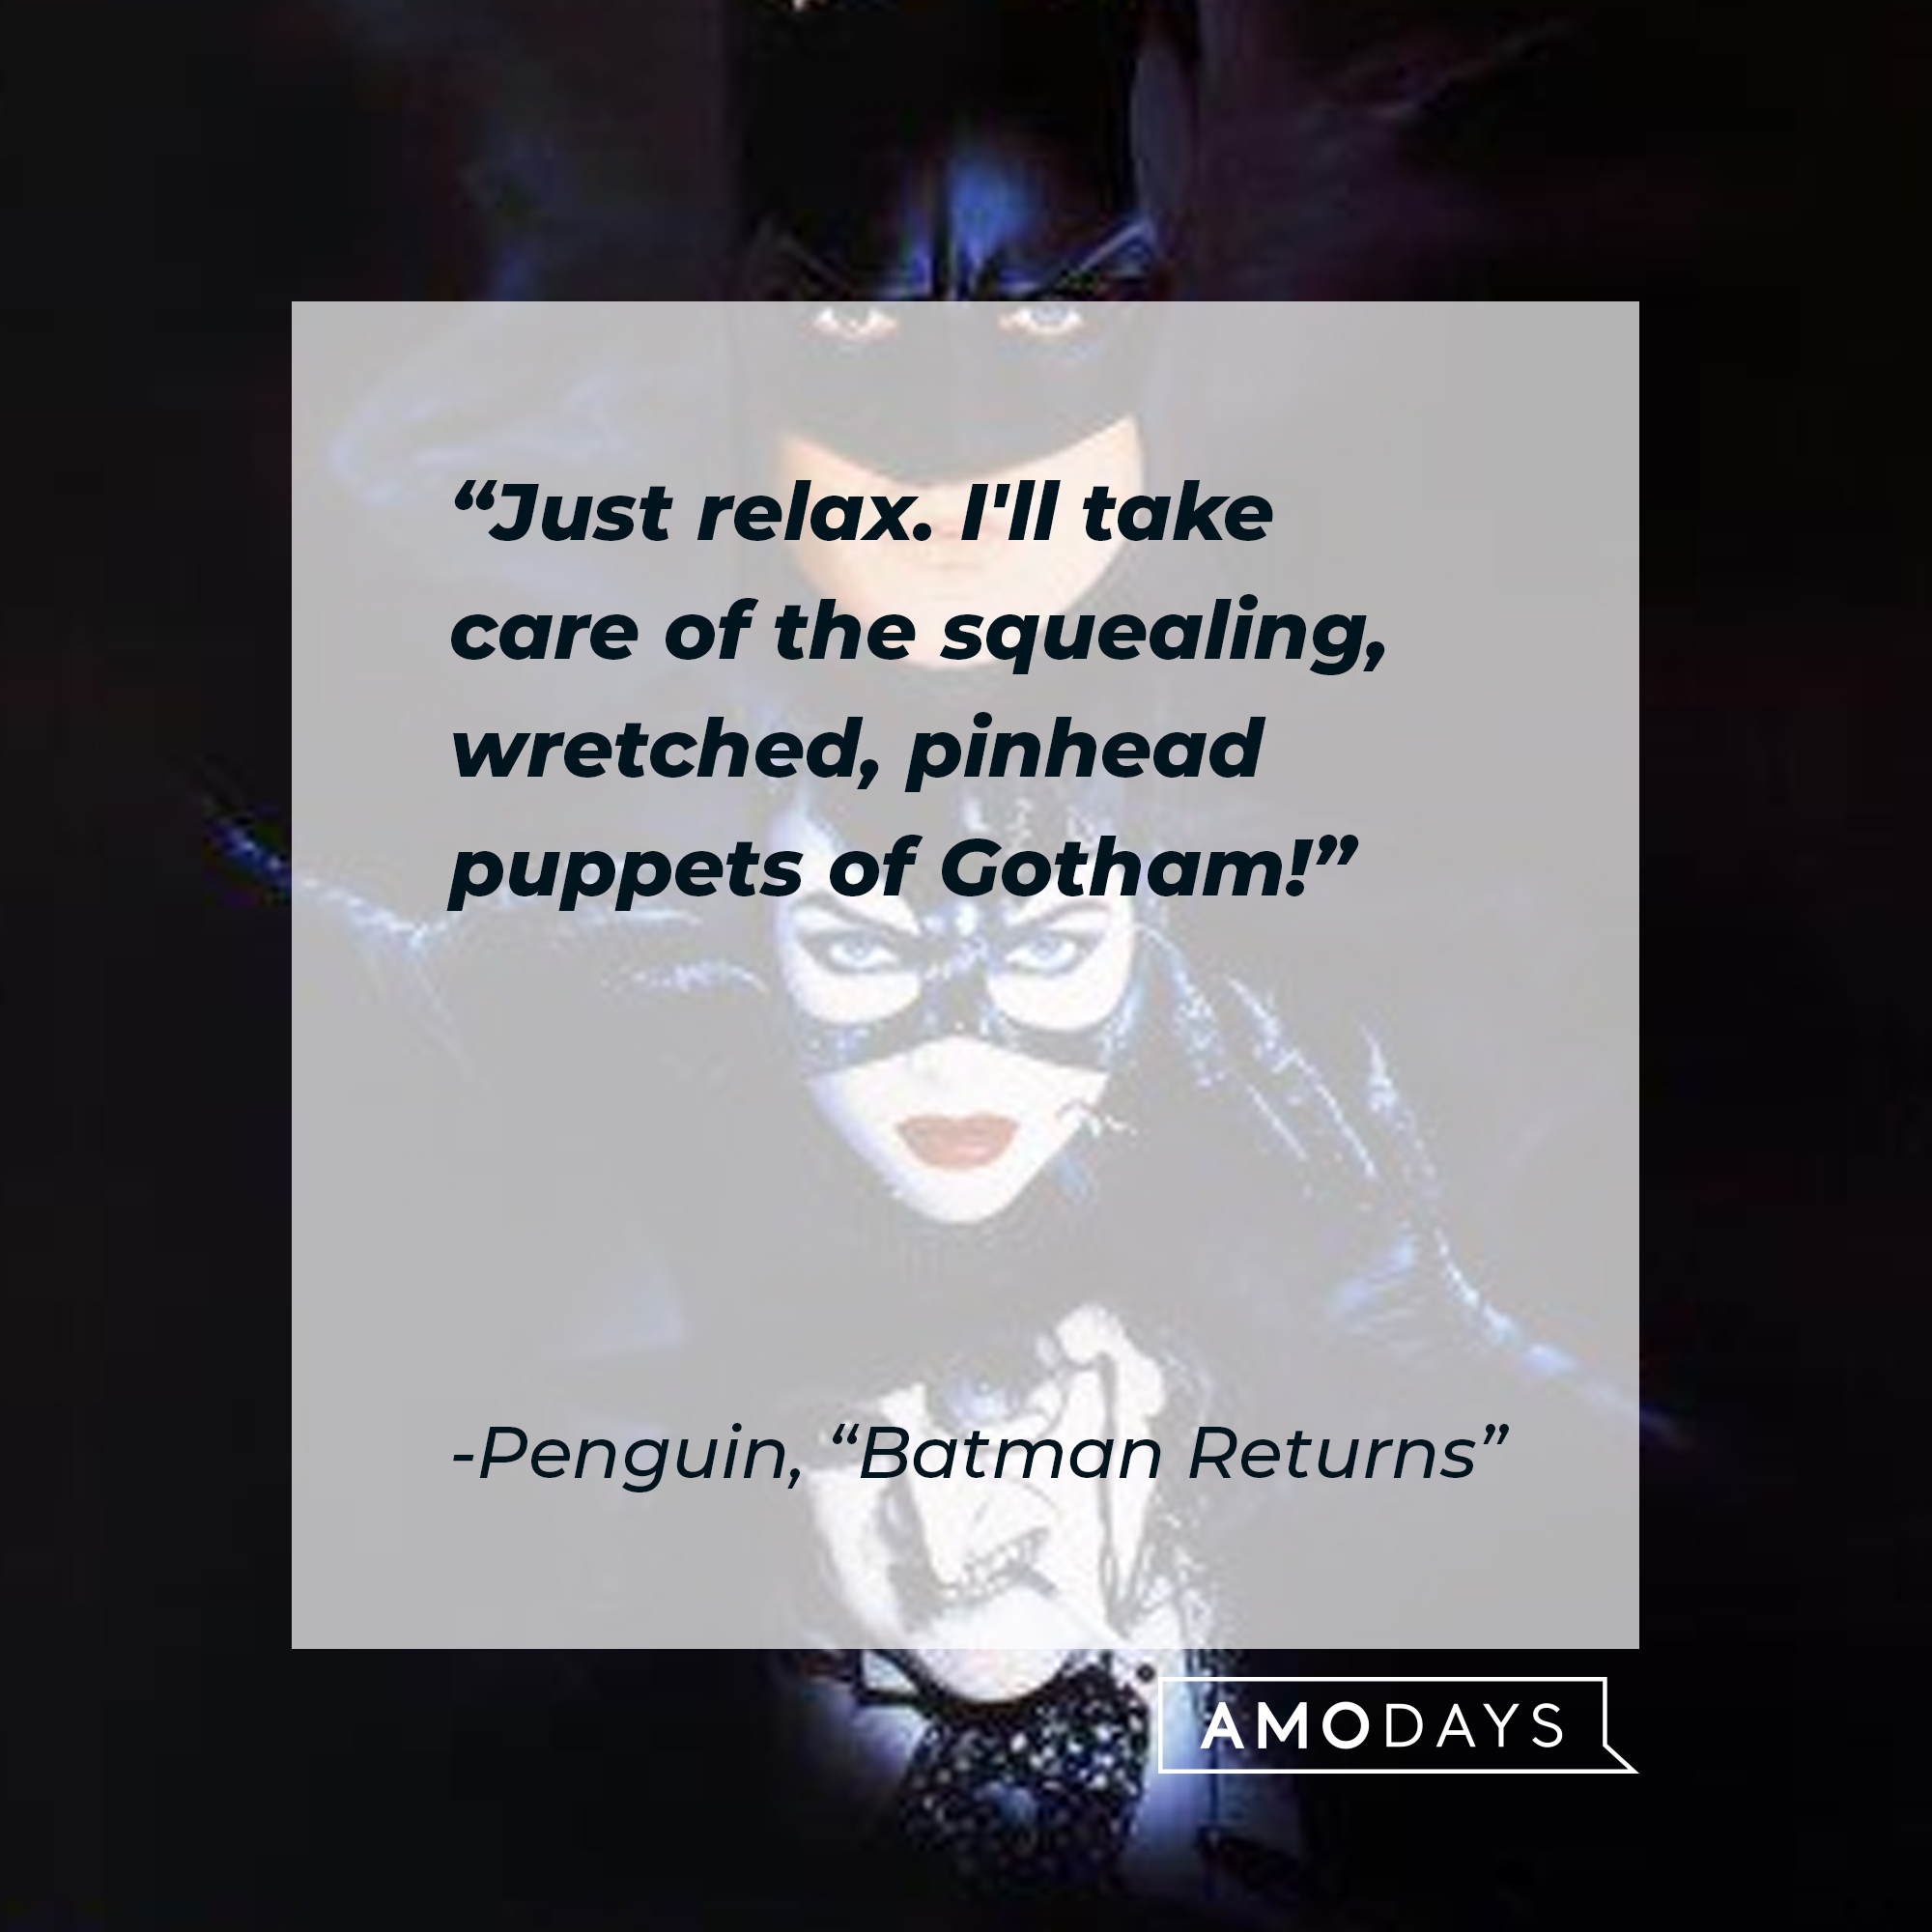 Penguin's quote from "Batman Returns" : "Just relax. I'll take care of the squealing, wretched, pinhead puppets of Gotham!" | Source: facebook.com/BatmanReturnsFilm